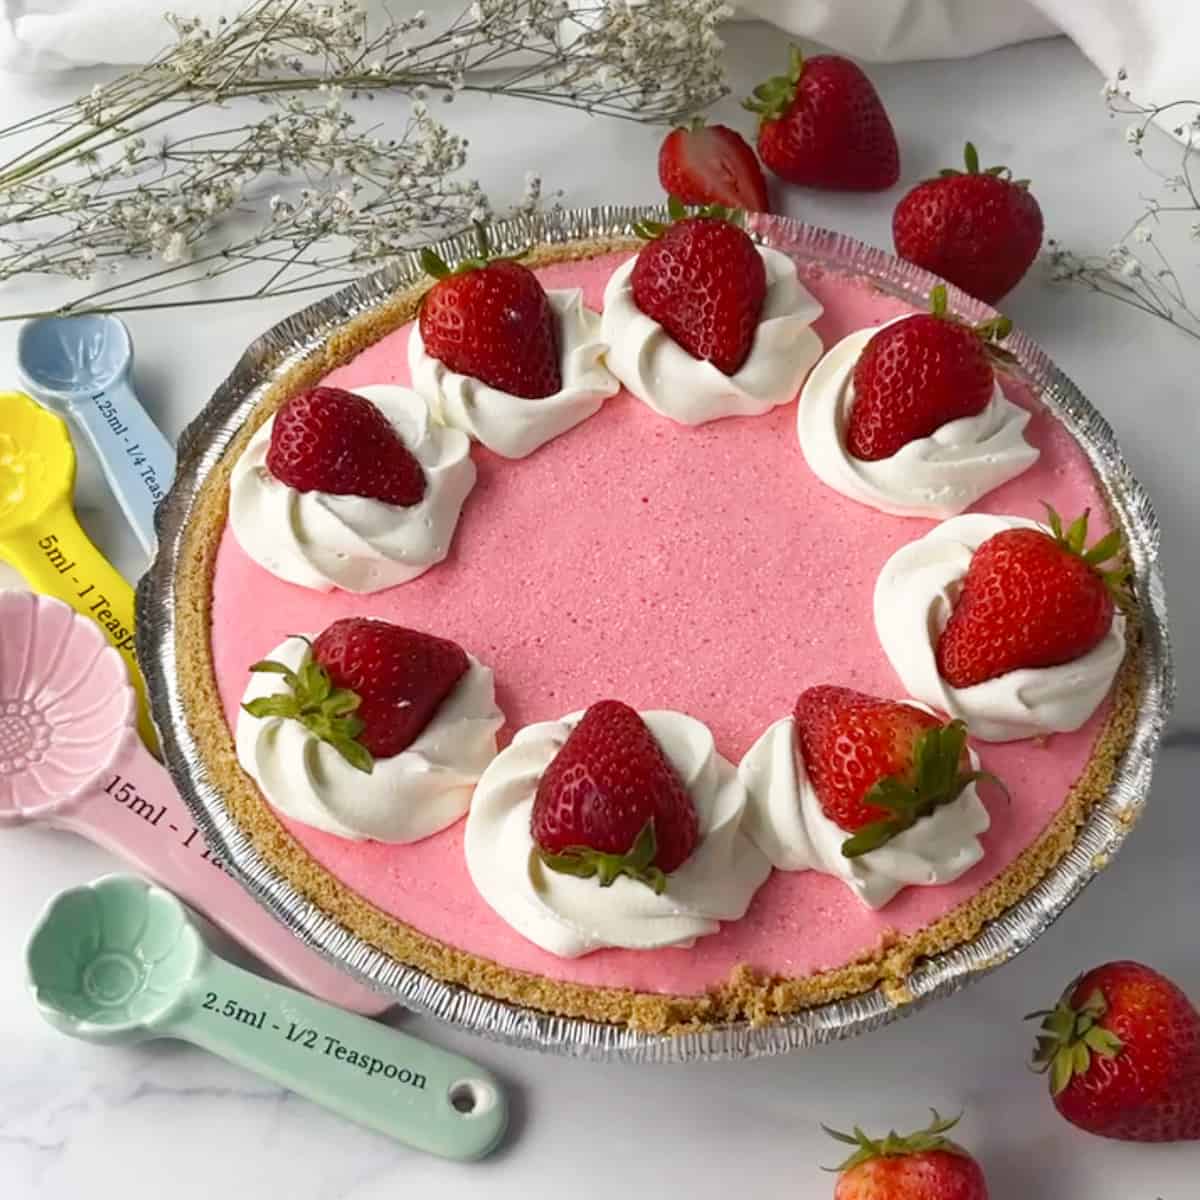 Cool whip pie in graham cracker crust with strawberries on top.